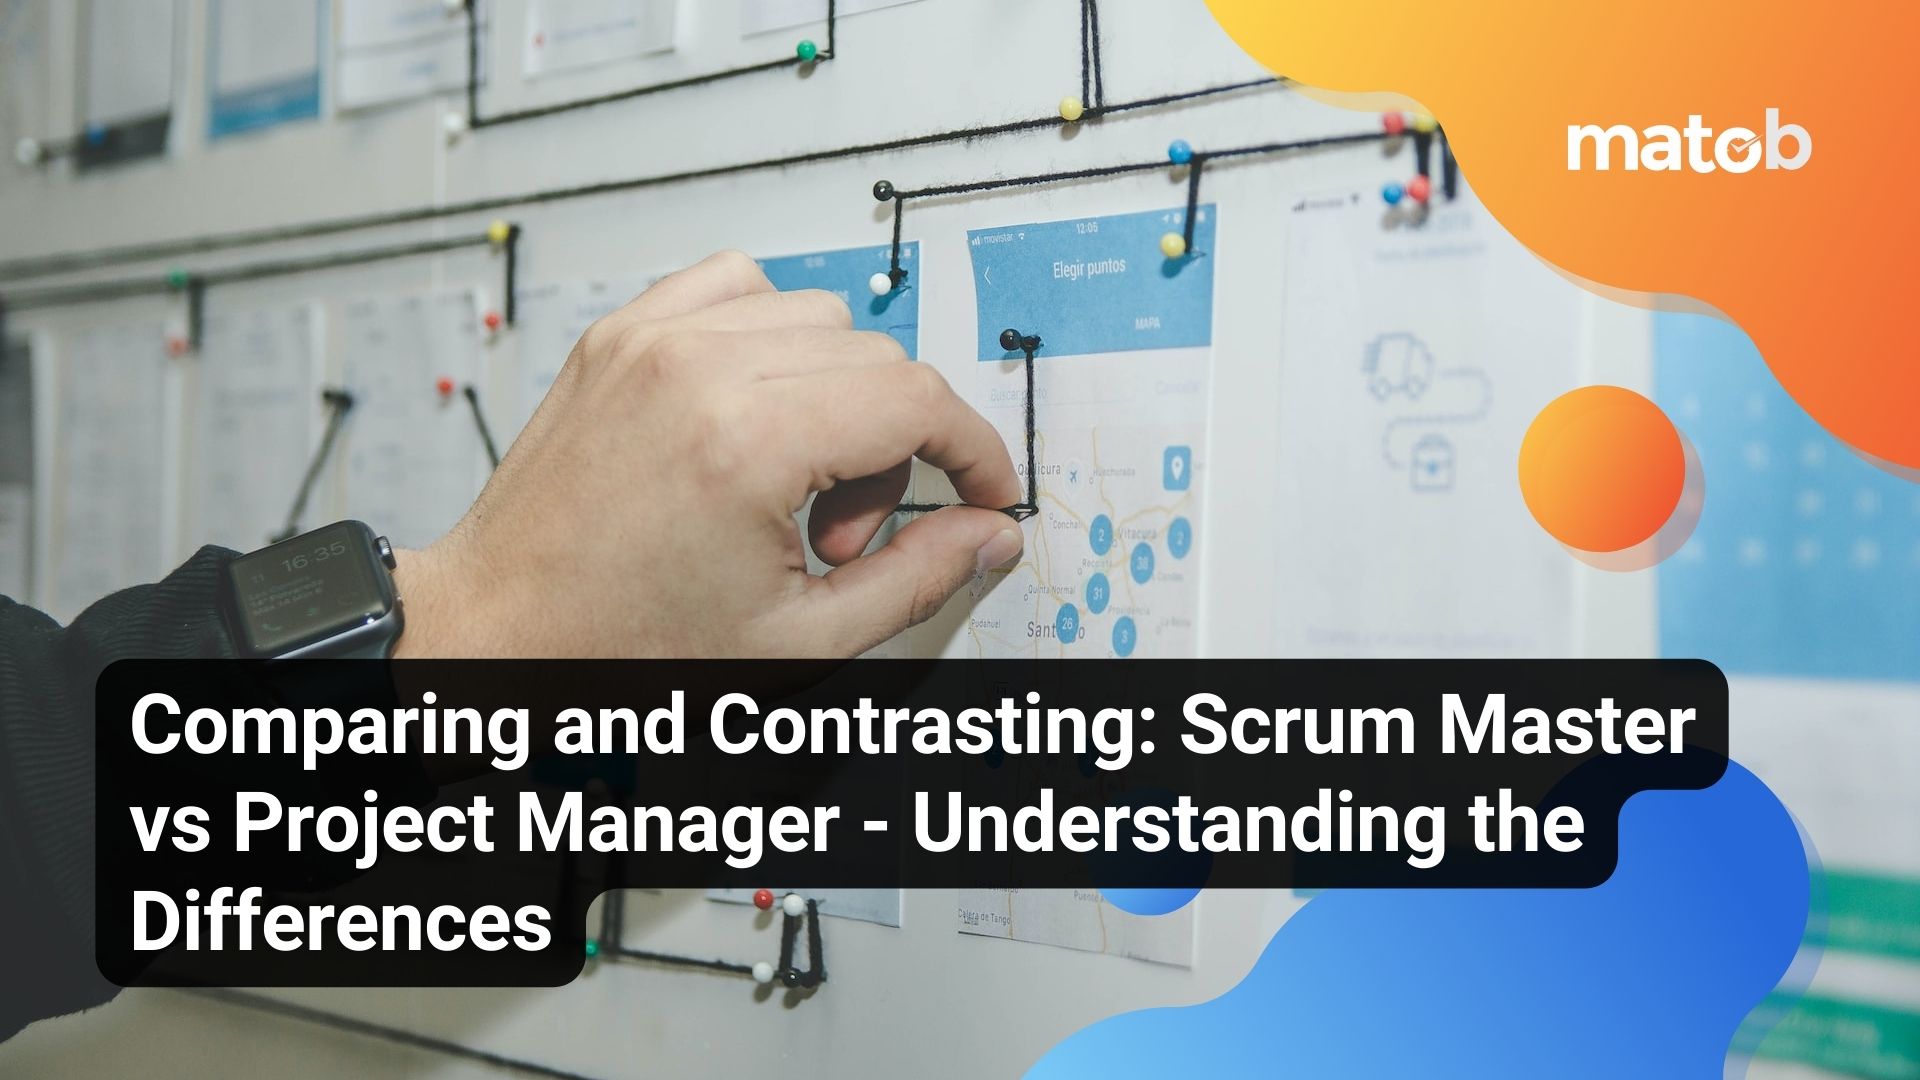 Comparing and Contrasting: Scrum Master vs Project Manager - Understanding the Differences